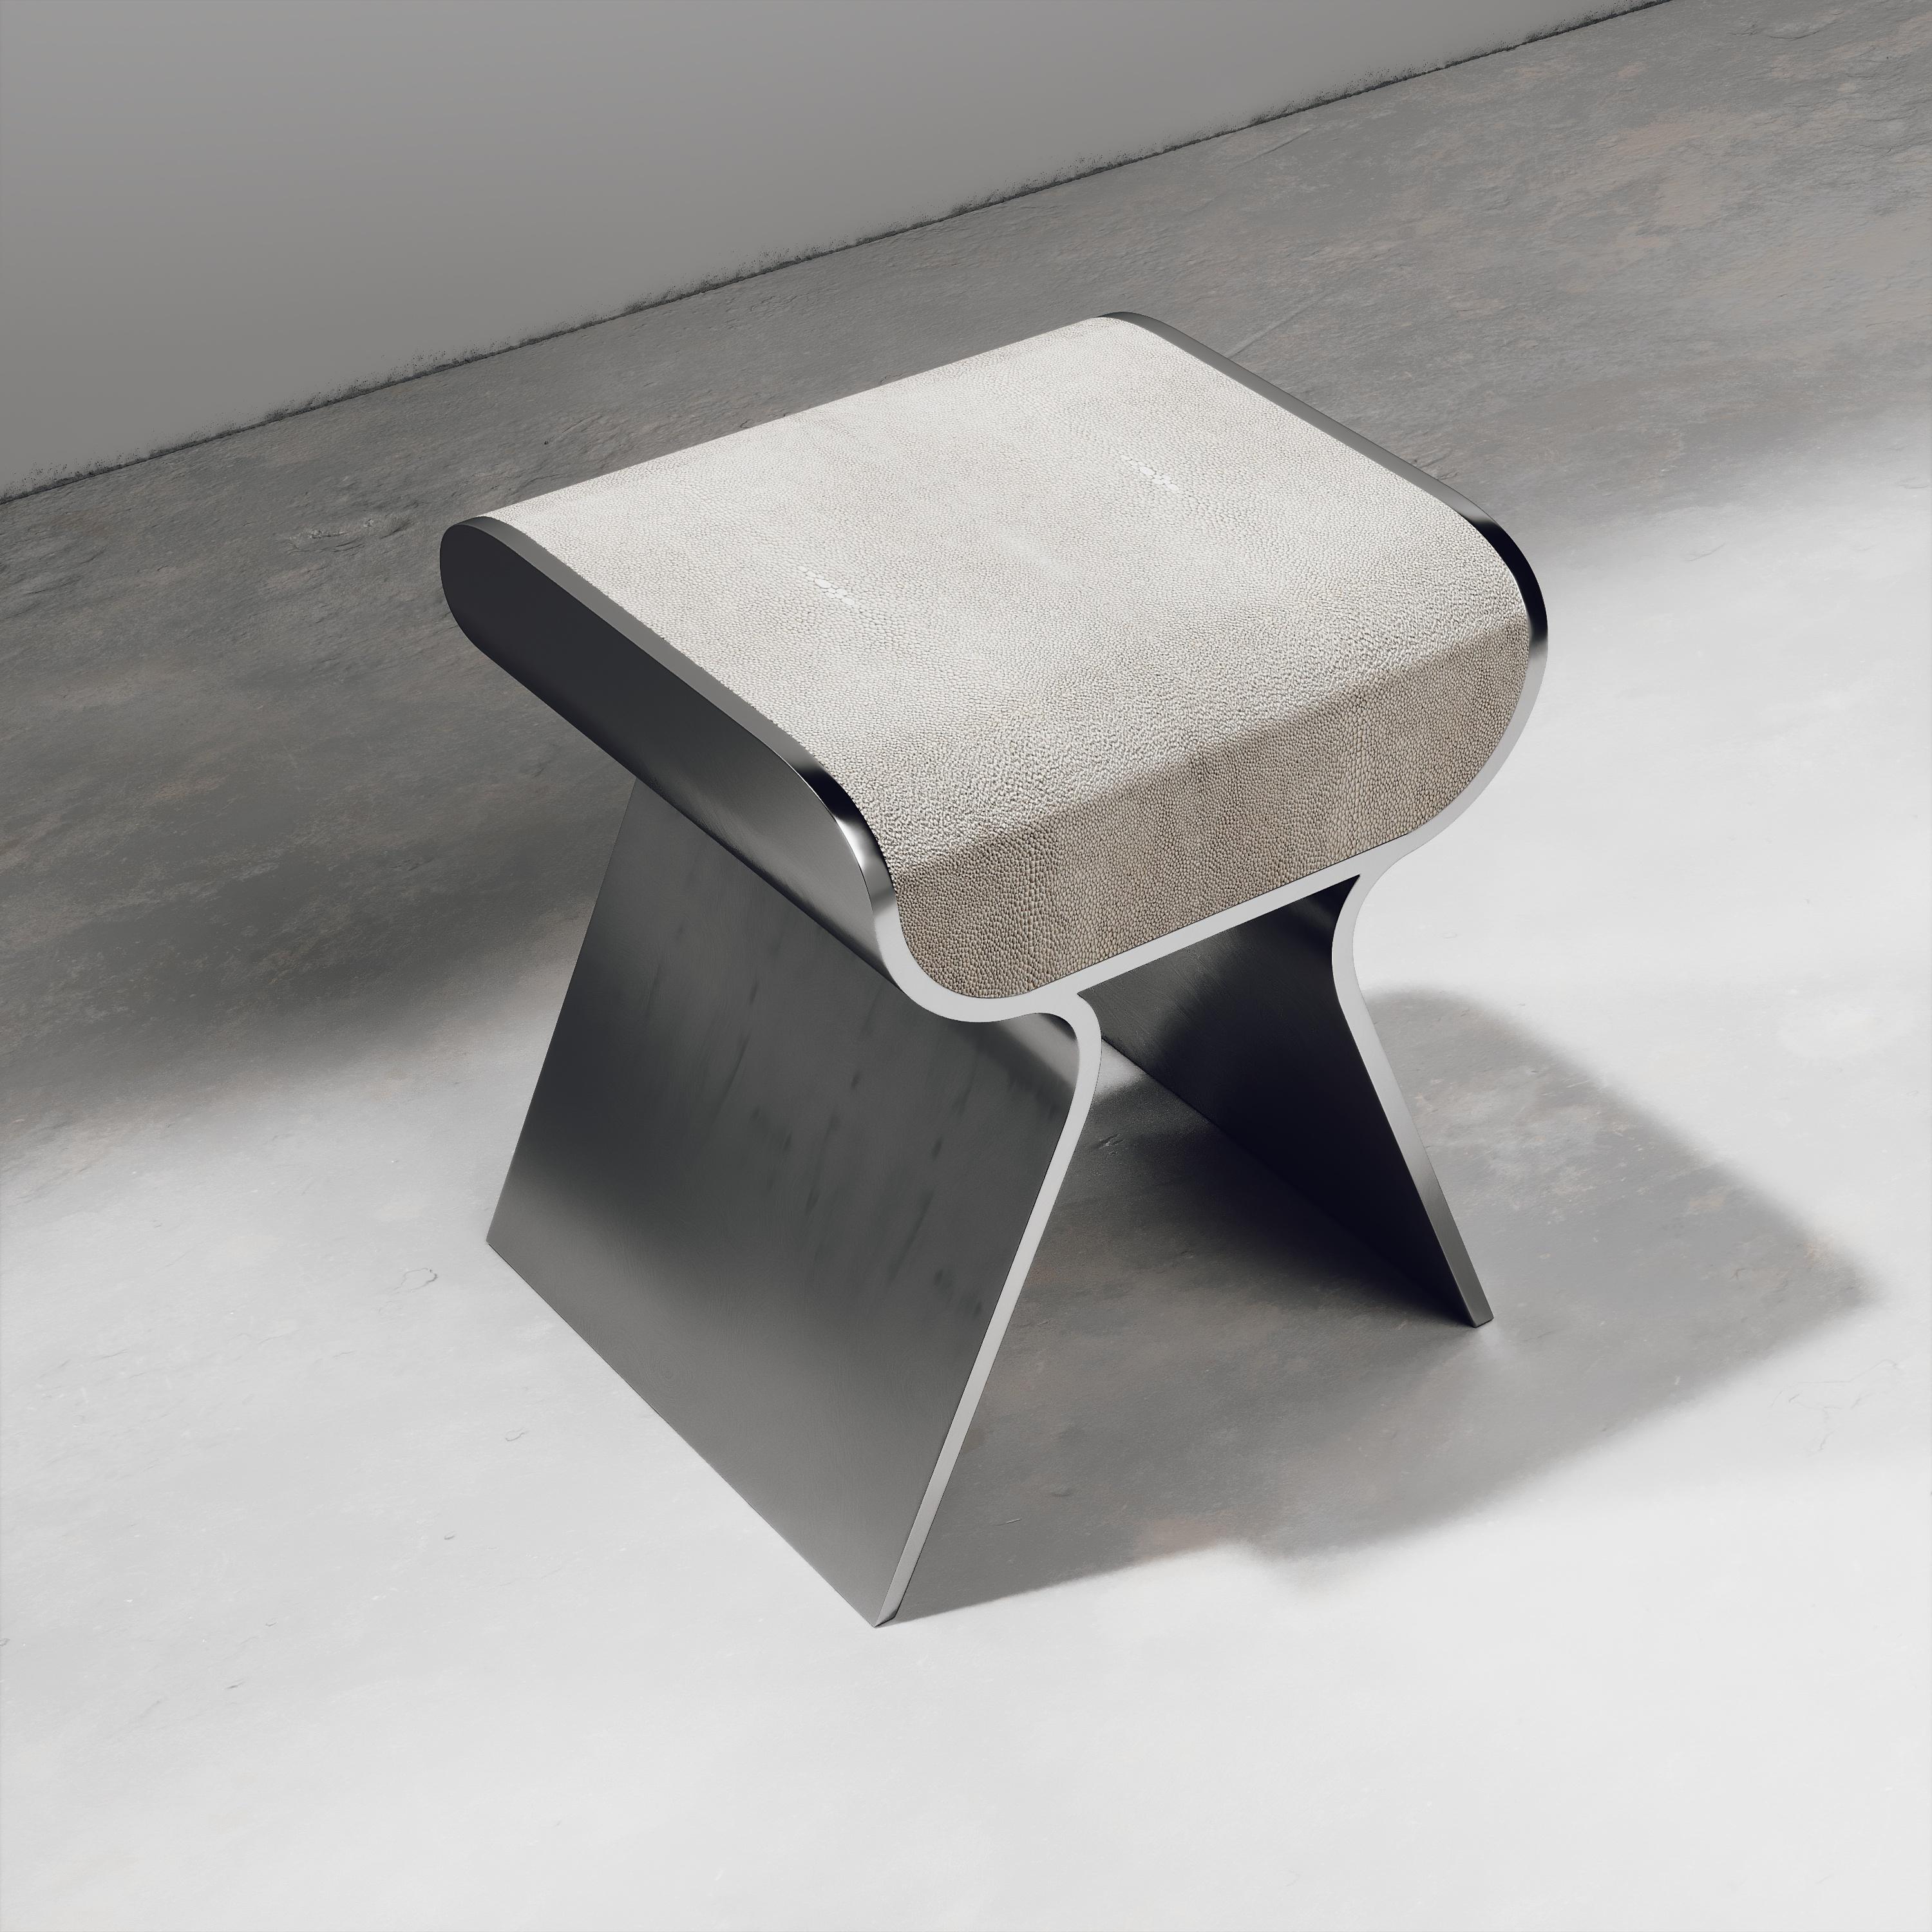 The dandy stool inlaid in cream shagreen is a chic seating piece for any space. The sides of the pieces are completely inlaid in polished steel adding another luxurious and modern element to the piece. Available in other finishes and as a bench, see